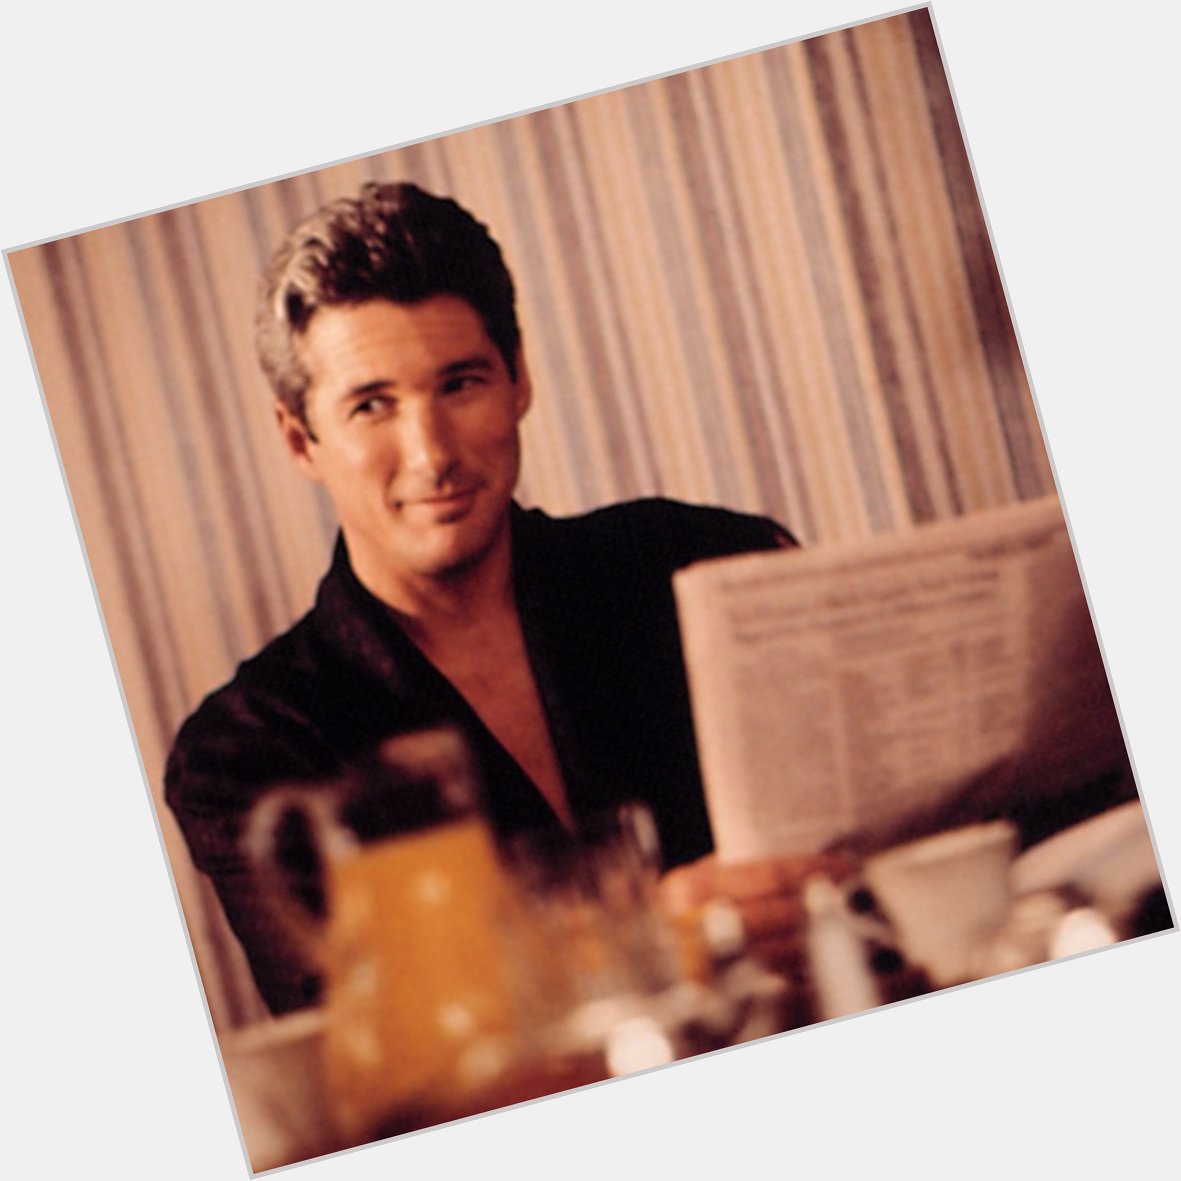 Happy Birthday to one of my favs Richard Gere! 